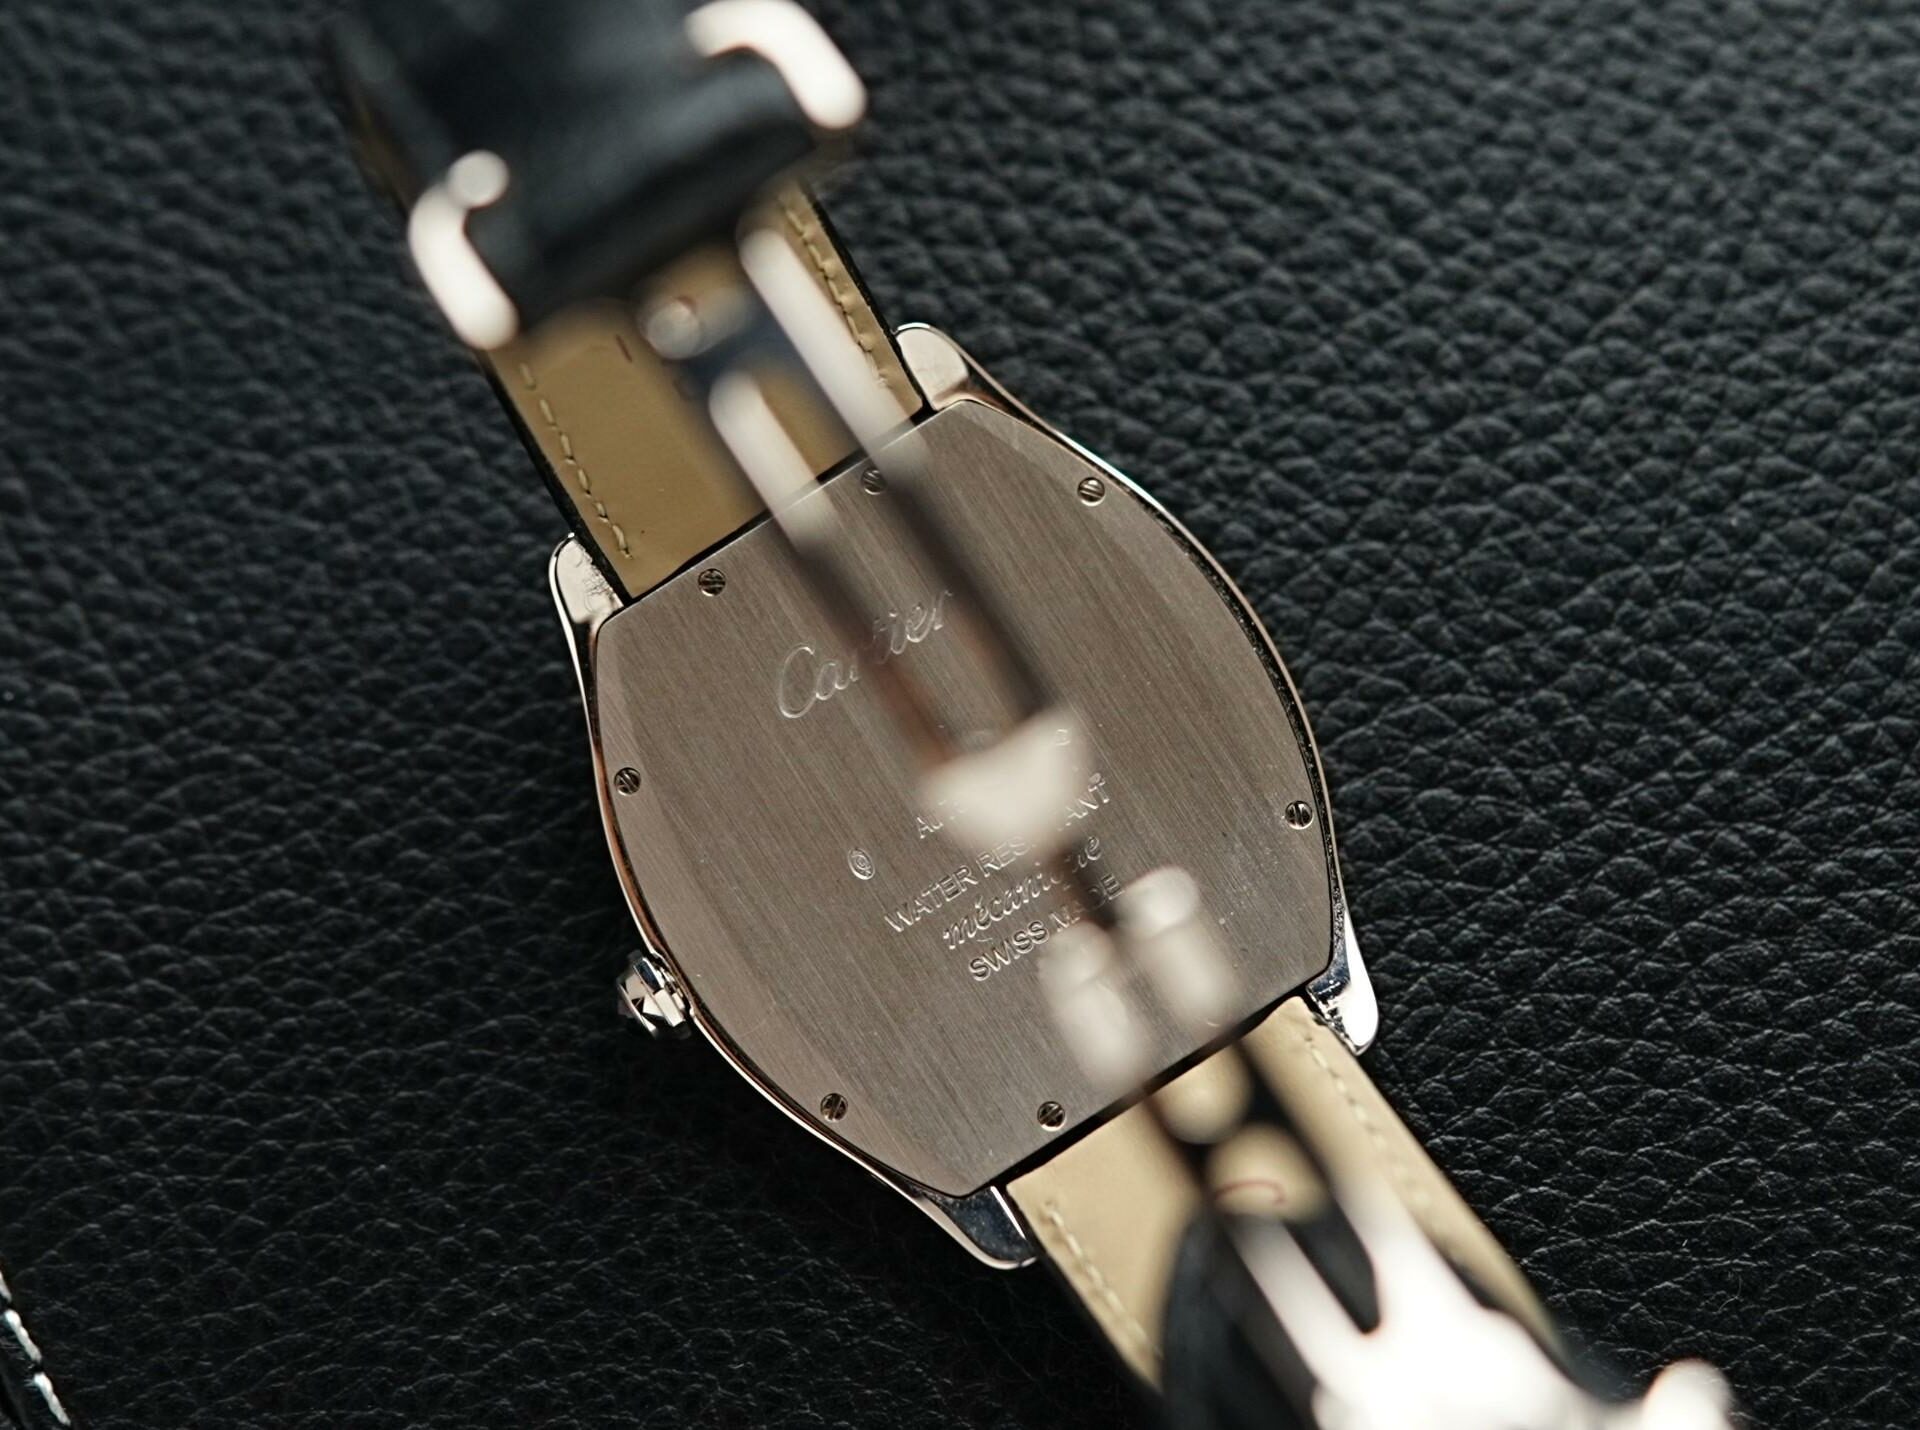 Back side of the Cartier Tortue.